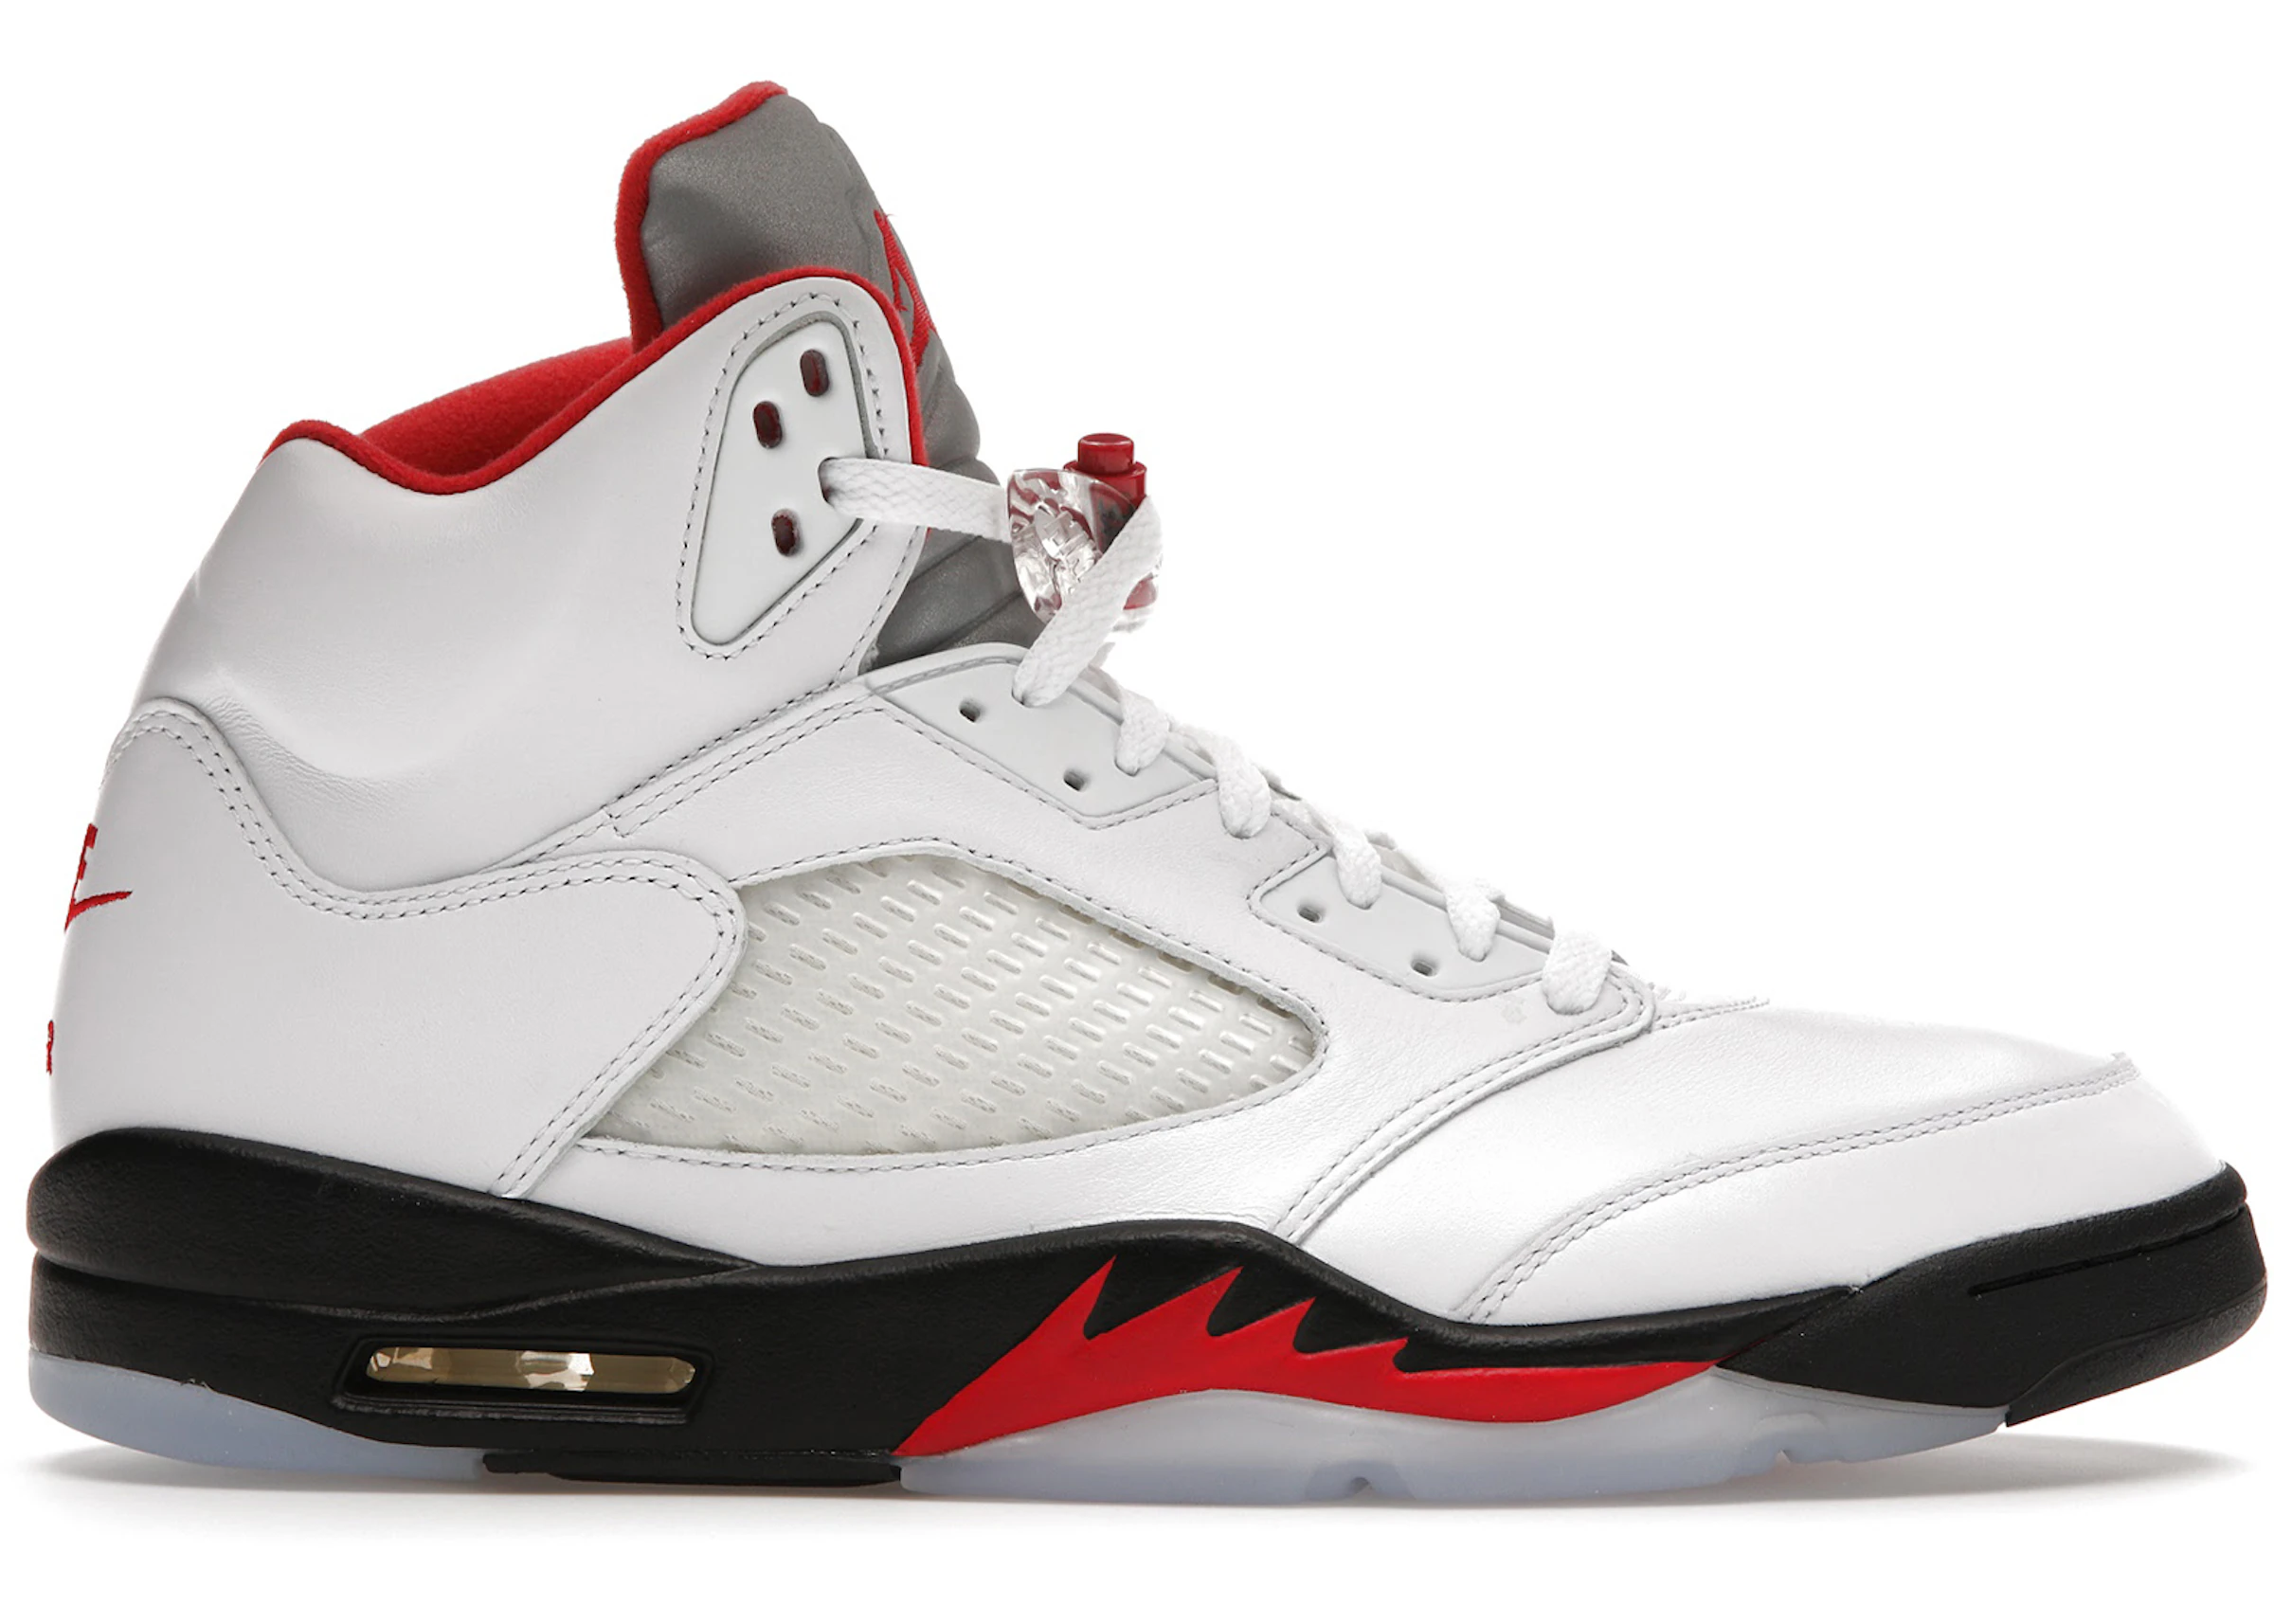 Fire Red 5s Grey Tongue On Feet